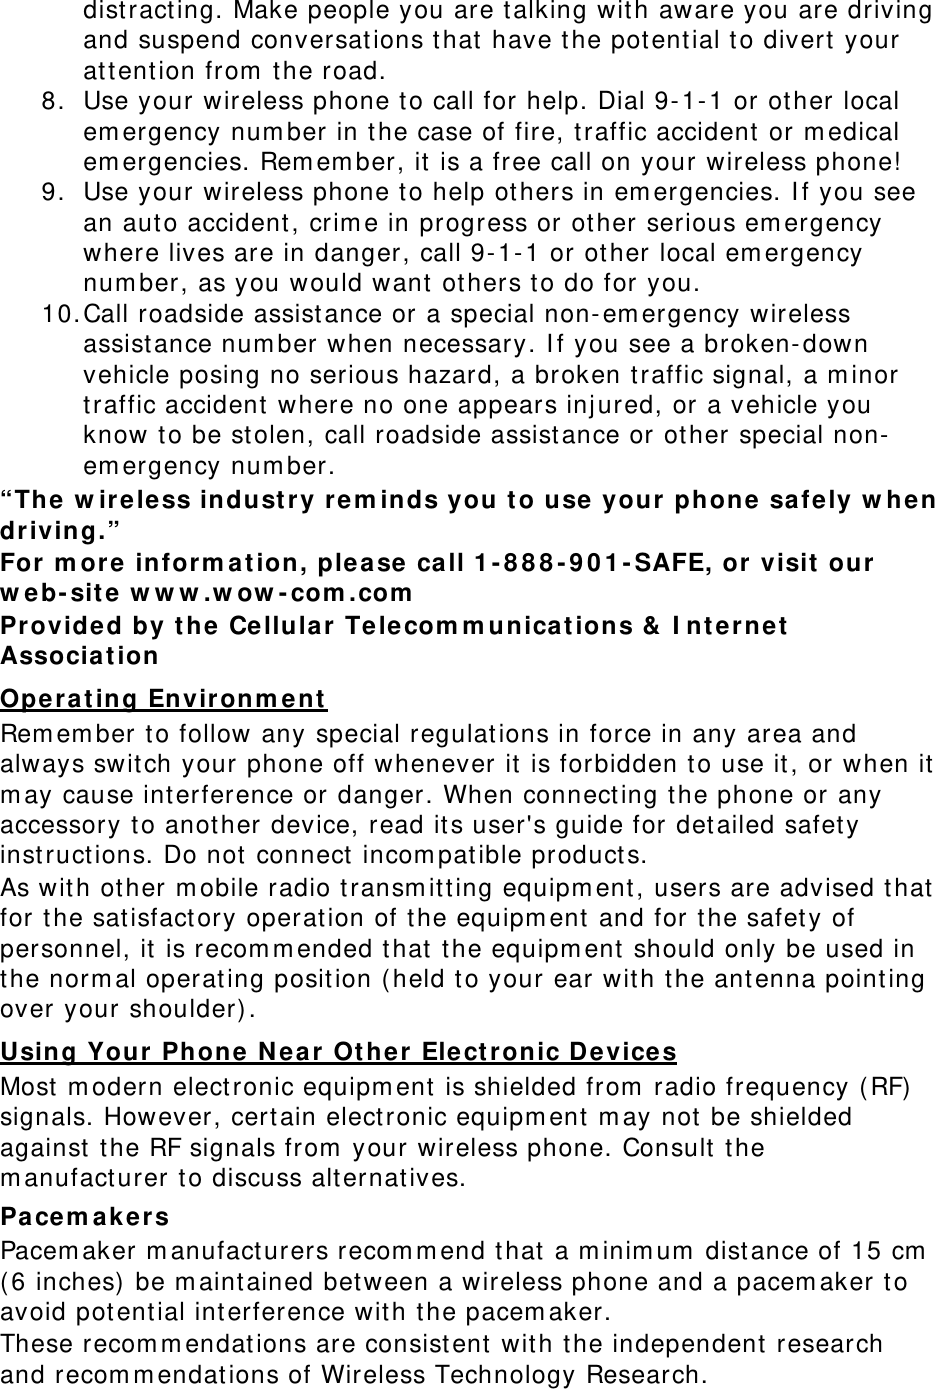 dist racting. Make people you are t alking wit h aware you are driving and suspend conversat ions t hat  have t he potential to divert  your attention from  the road. 8. Use your wireless phone to call for help. Dial 9- 1-1 or ot her local em ergency num ber in t he case of fire, t raffic accident or m edical em ergencies. Rem em ber, it is a free call on your wireless phone!  9. Use your wireless phone t o help ot hers in em ergencies. I f you see an auto accident, crim e in progress or other serious em ergency where lives are in danger, call 9- 1-1 or ot her local em ergency num ber, as you would want others t o do for you. 10. Call roadside assist ance or a special non- em ergency wireless assistance num ber when necessary. I f you see a broken- down vehicle posing no serious hazard, a broken t raffic signal, a m inor traffic accident where no one appears inj ured, or a vehicle you know to be st olen, call roadside assist ance or ot her special non-em ergency num ber. “The w ir ele ss indust ry re m inds you t o use your  phone  safe ly w hen driving.” For m ore inform a t ion, ple ase ca ll 1 - 8 8 8 - 9 0 1 - SAFE, or visit  our  w eb- sit e w w w .w ow - com .com  Provided by t he Ce llula r Telecom m unica t ions &amp;  I nt e rnet Associa t ion Oper atin g Envir onm ent  Rem em ber t o follow any special regulat ions in force in any area and always switch your phone off whenever it is forbidden to use it , or when it  m ay cause int erference or danger. When connect ing t he phone or any accessory to anot her device, read it s user&apos;s guide for det ailed safet y inst ruct ions. Do not connect  incom pat ible product s. As wit h ot her m obile radio t ransm itting equipm ent , users are advised that  for the sat isfactory operat ion of t he equipm ent  and for the safet y of personnel, it  is recom m ended that t he equipm ent should only be used in the norm al operat ing posit ion ( held t o your ear with t he antenna point ing over your shoulder) . Using Your Phone  N ear  Ot her  Ele ct ronic Device s Most  m odern elect ronic equipm ent is shielded from  radio frequency (RF) signals. However, cert ain elect ronic equipm ent m ay not  be shielded against  the RF signals from  your wireless phone. Consult  t he m anufact urer t o discuss alt ernat ives. Pacem a kers Pacem aker m anufact urers recom m end that  a m inim um  dist ance of 15 cm  ( 6 inches)  be m aint ained bet ween a wireless phone and a pacem aker t o avoid potential int erference with t he pacem aker. These recom m endat ions are consist ent  wit h t he independent research and recom m endat ions of Wireless Technology Research. 